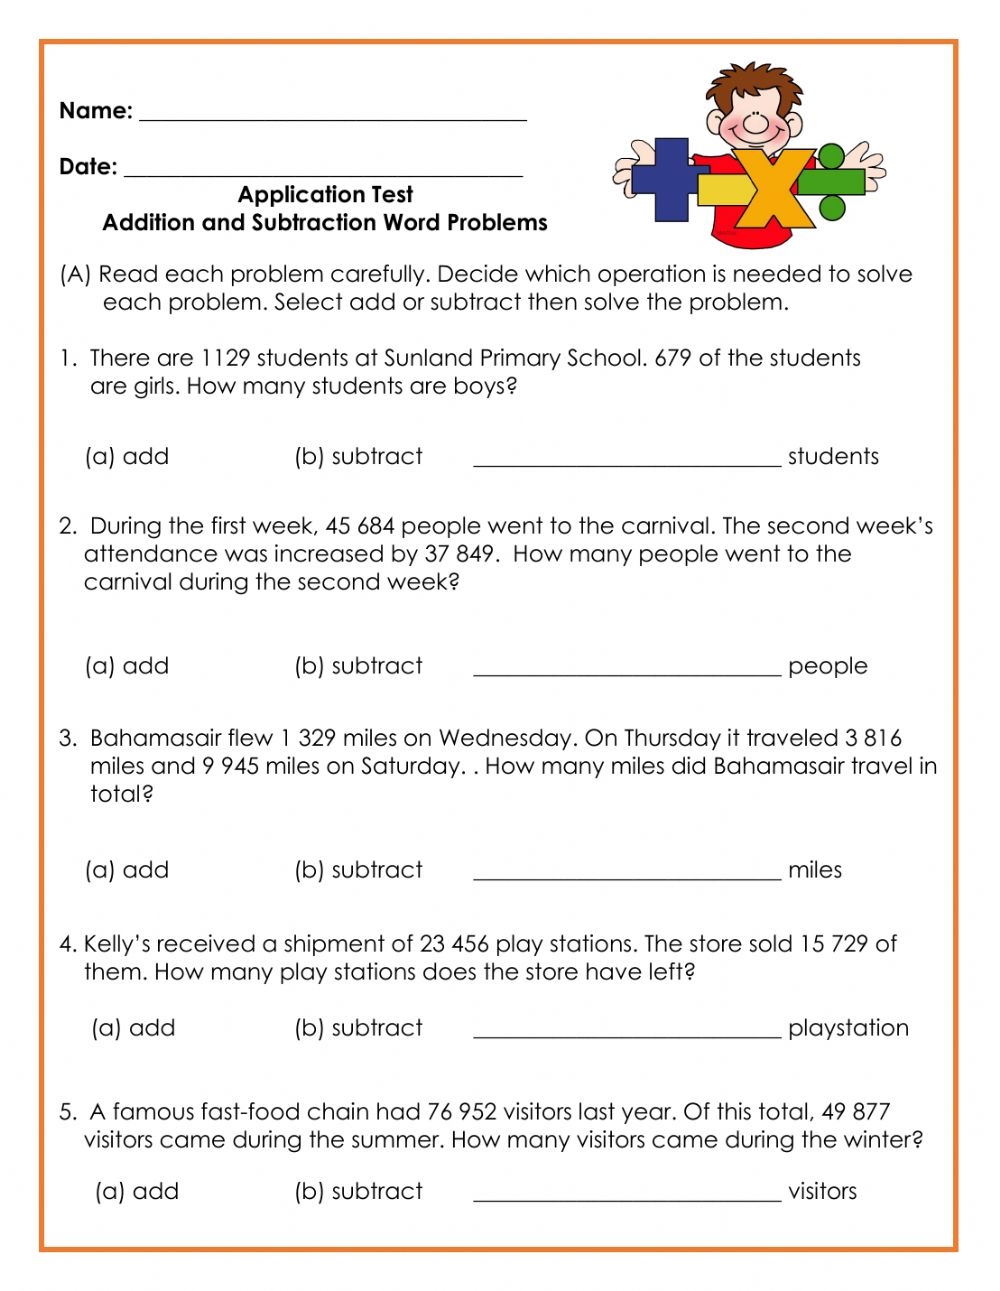 addition-and-subtraction-word-problems-math-math-worksheet-answers